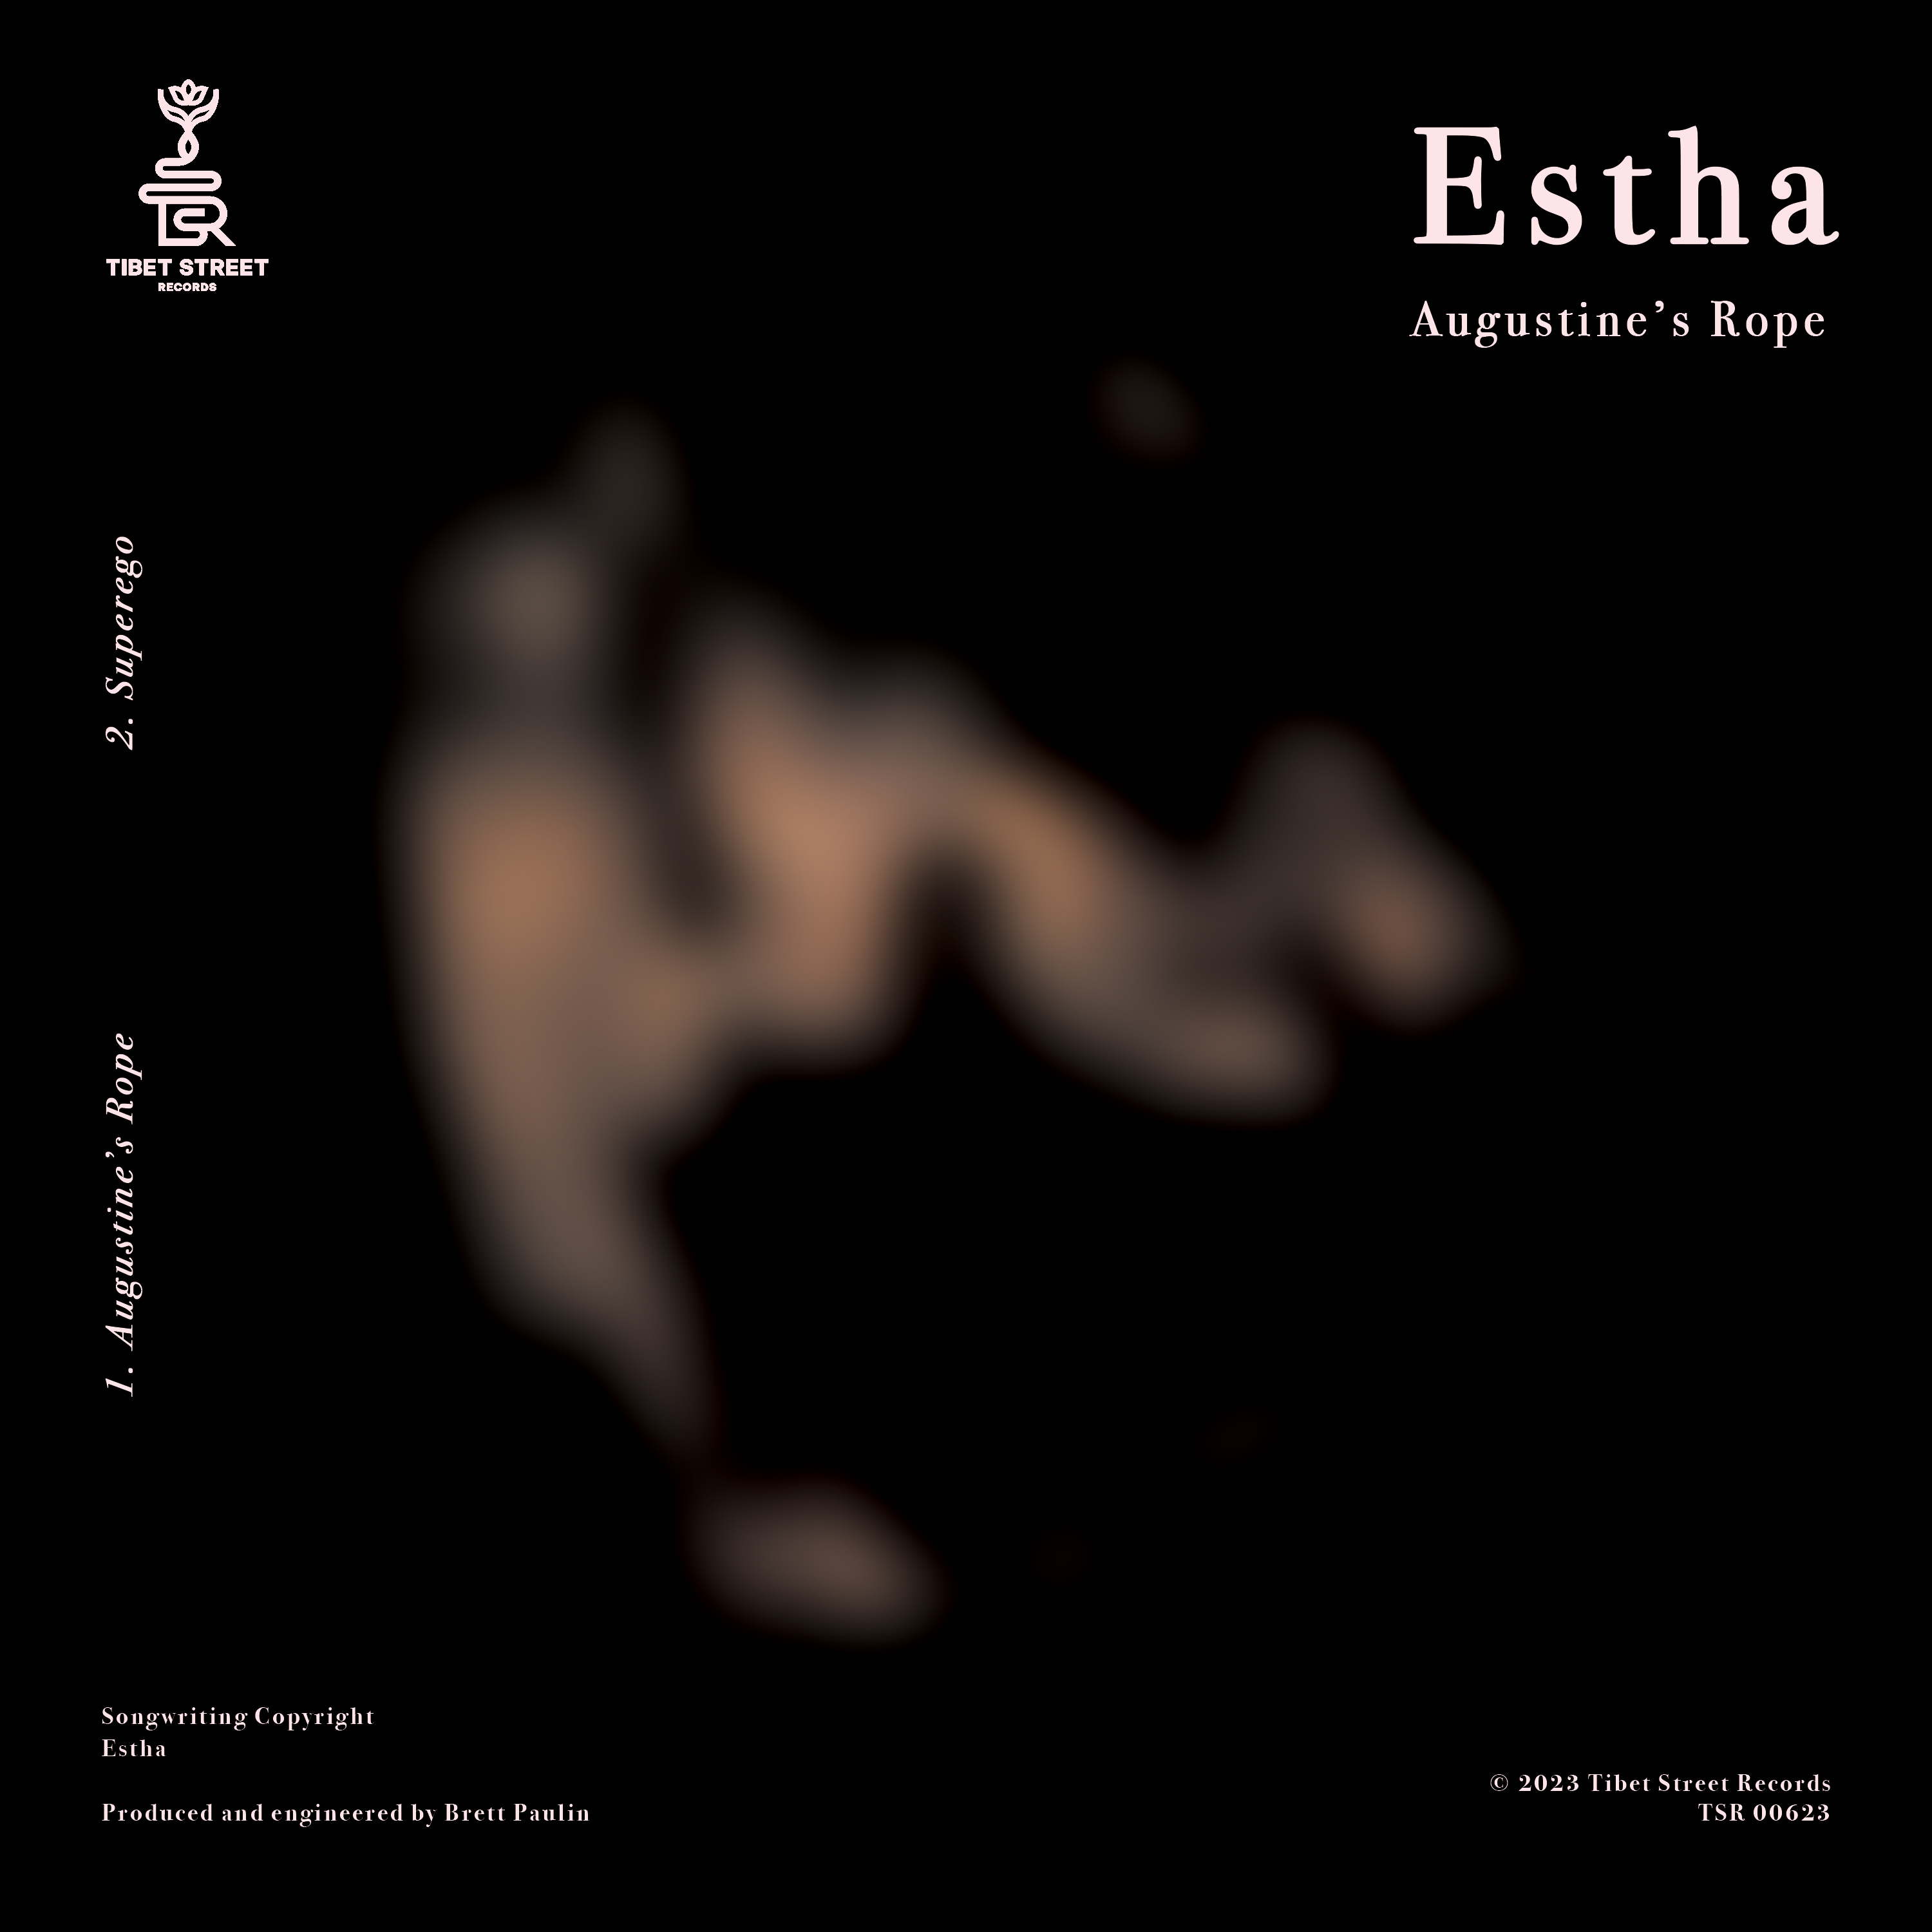 Estha--Augustine's Rope cover art